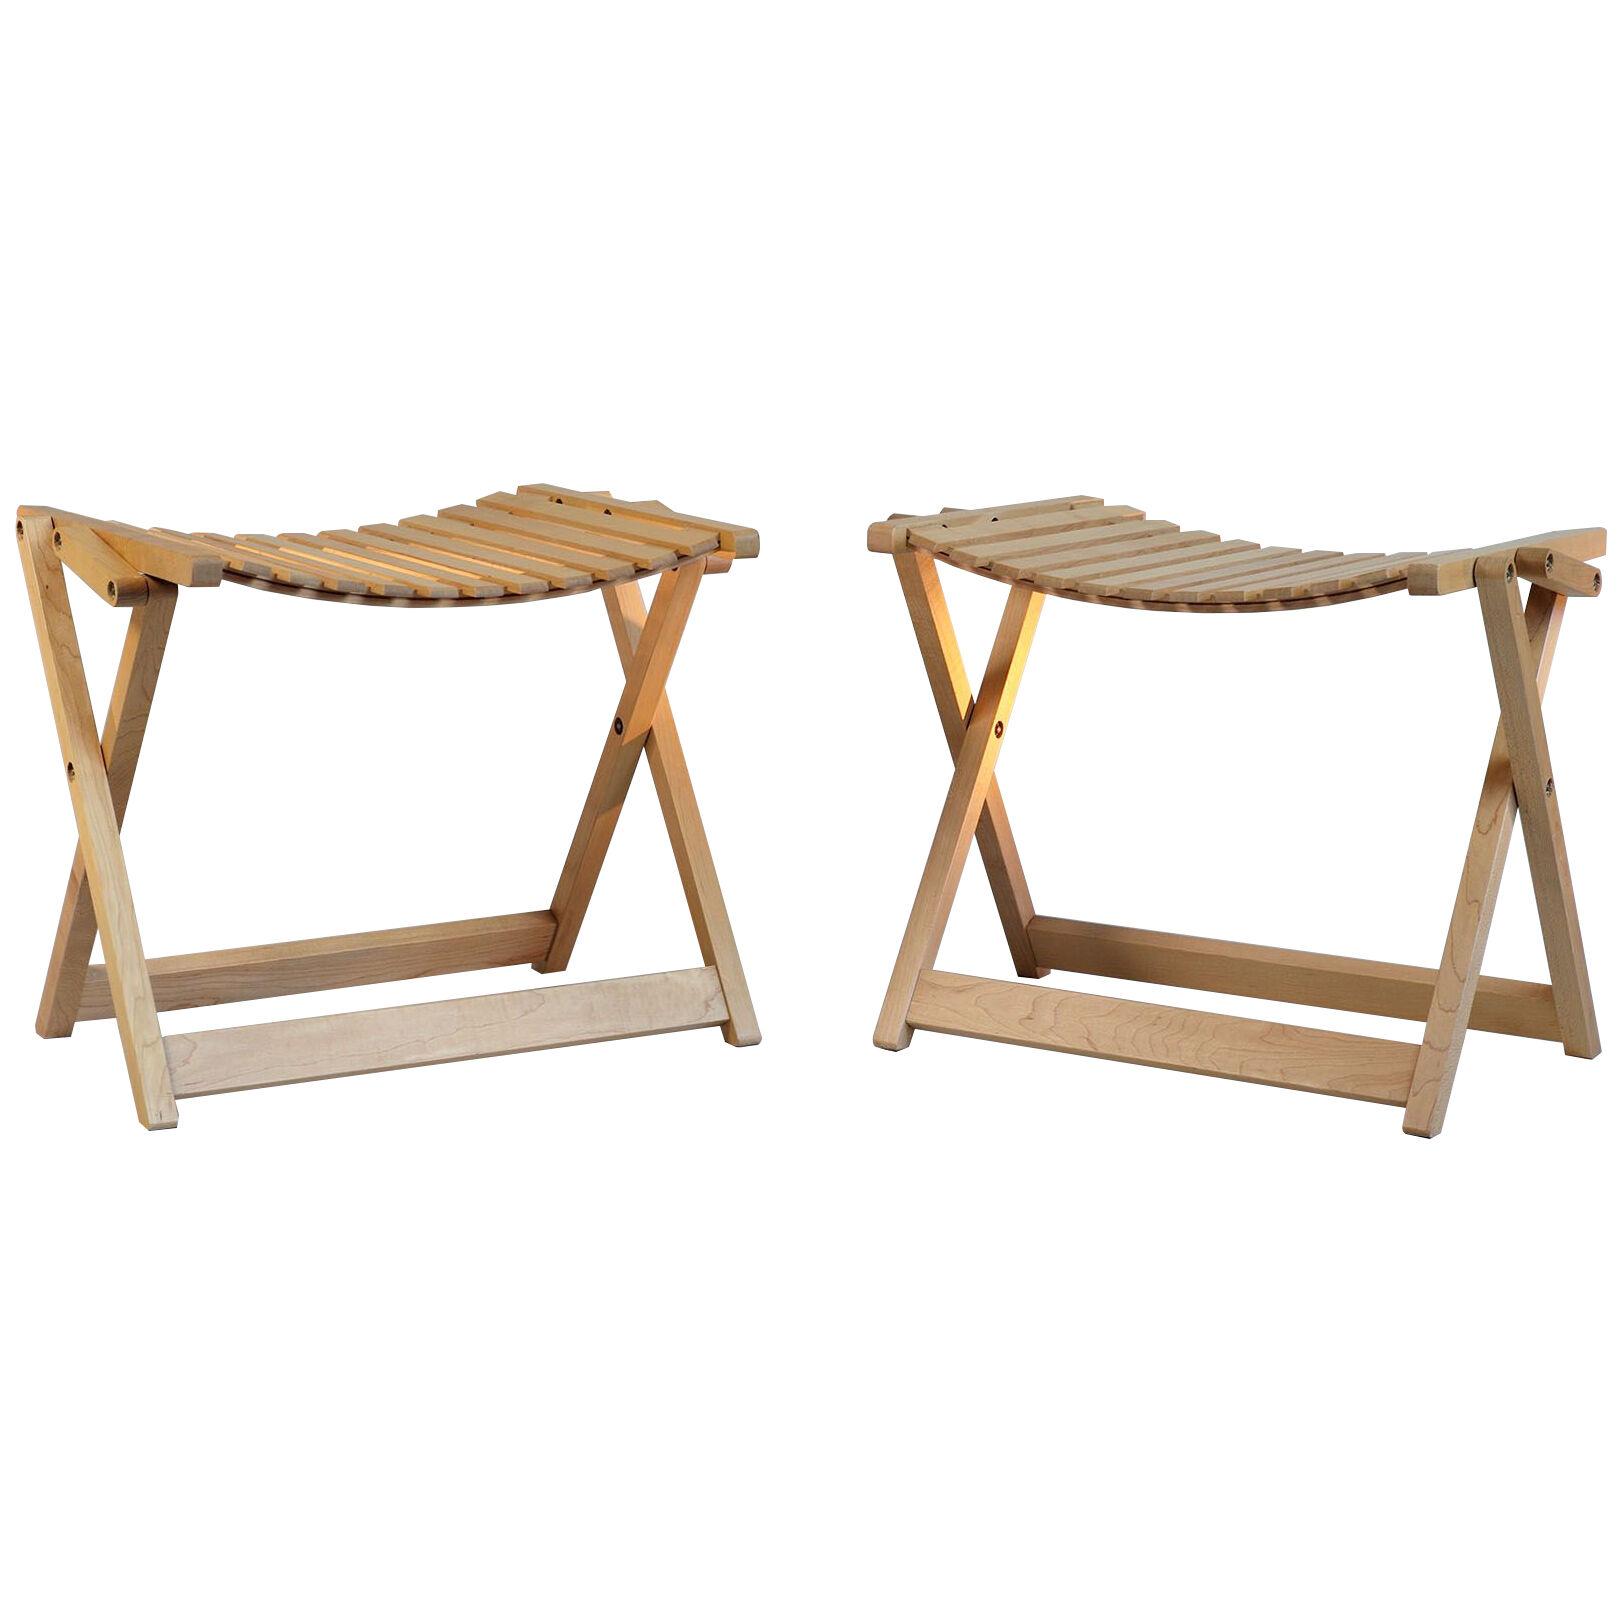 Jean-Claude Duboys: Pair of A4 maple stools, France 1980